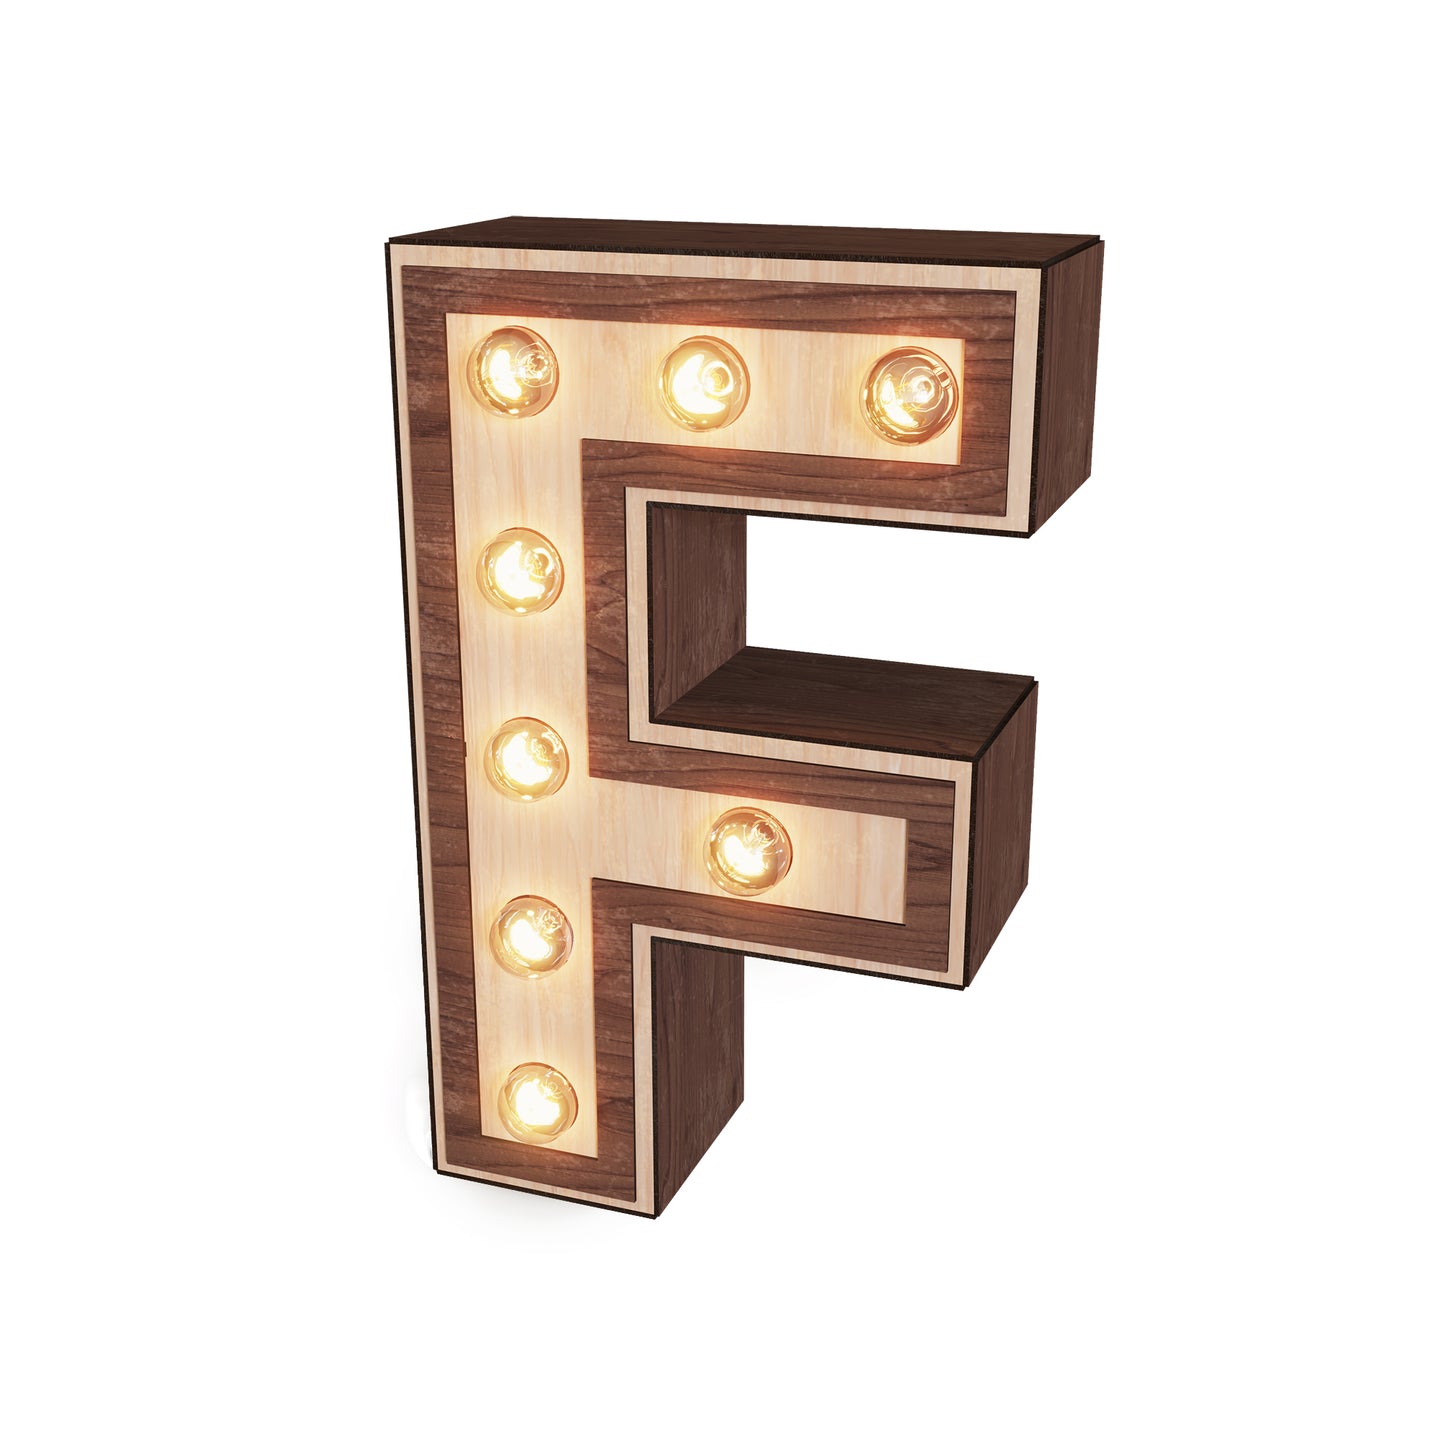 Light-up Marquee Letter Display "F"